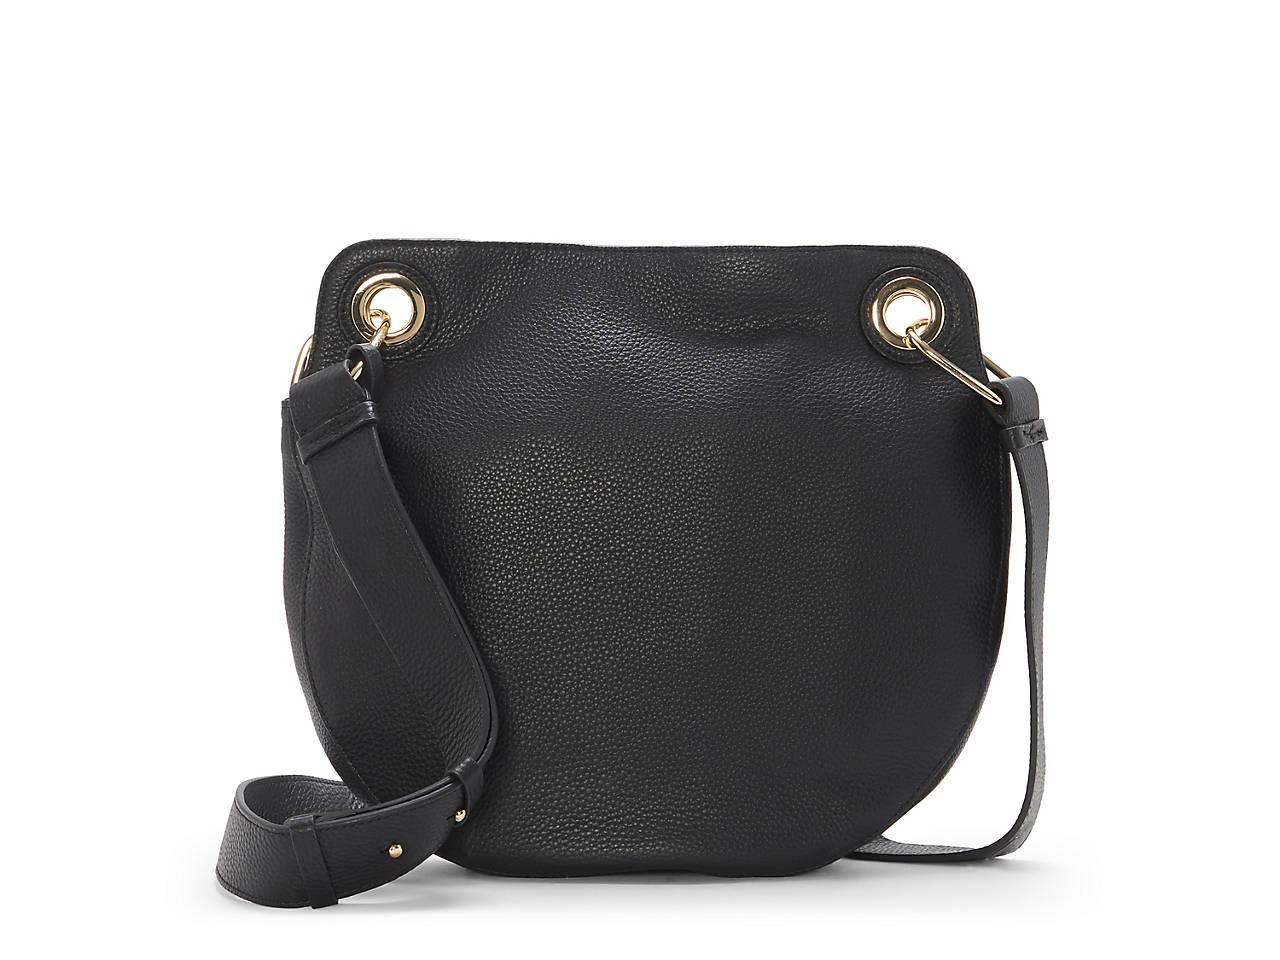 Vince Camuto Faria Leather Crossbody Bag in Black